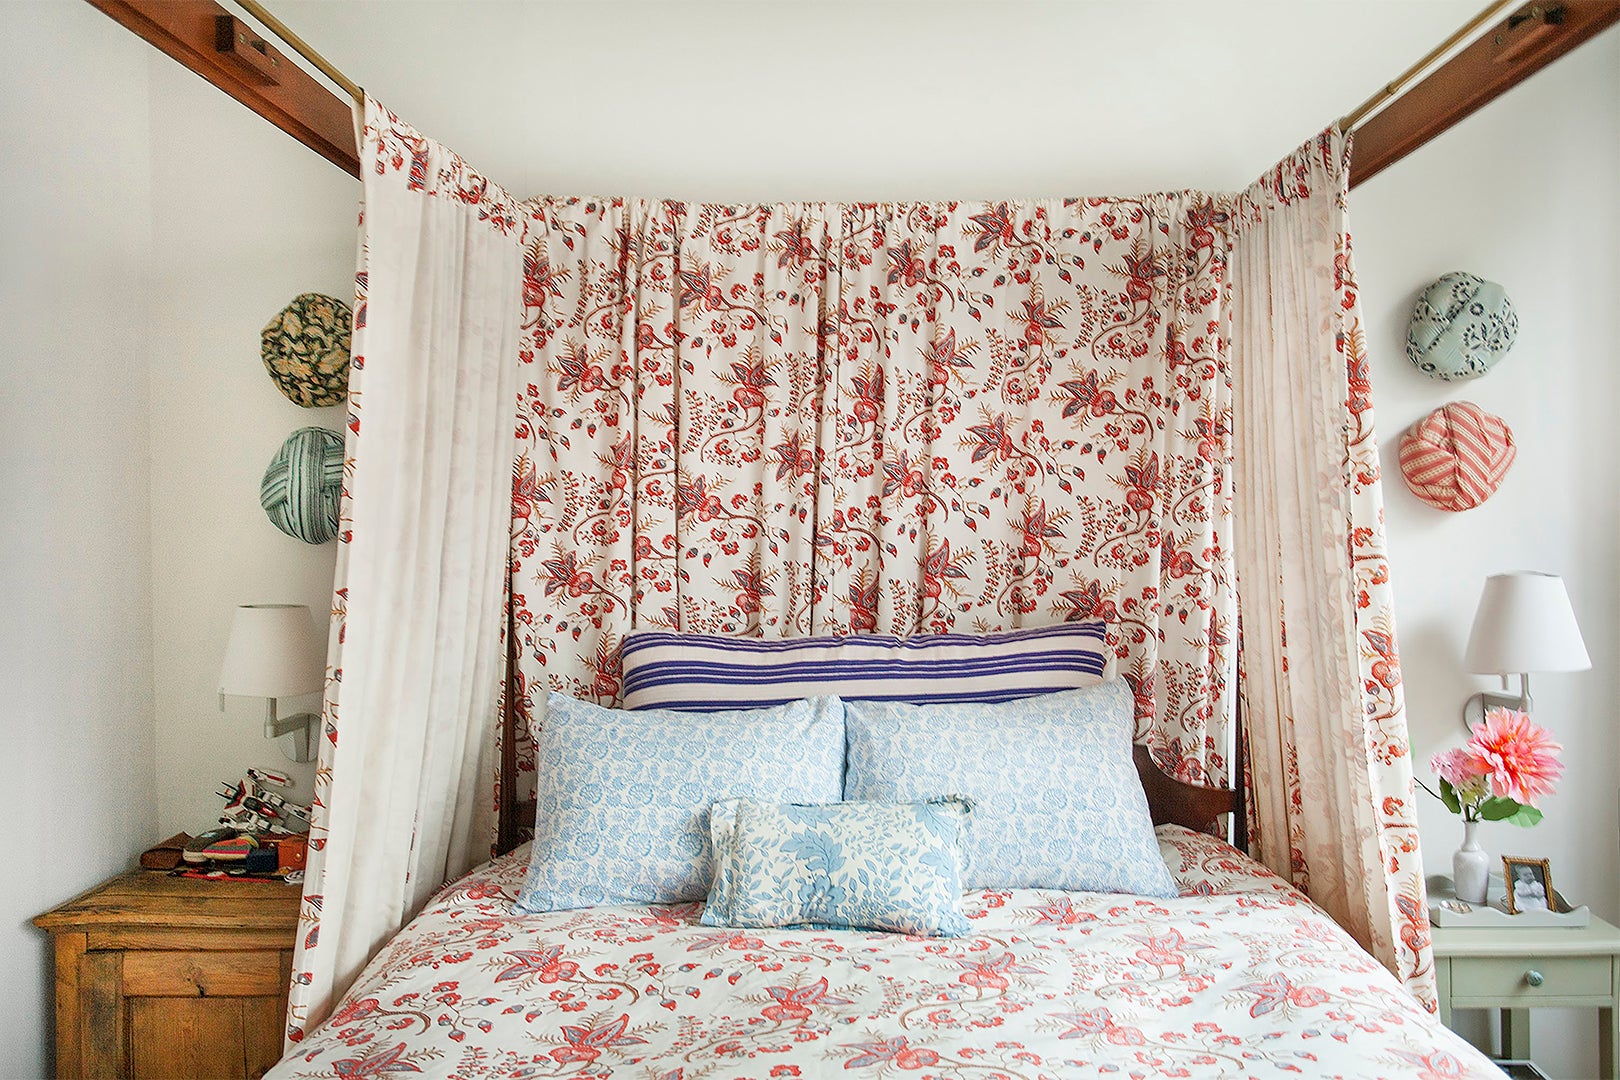 Chintz print-covered bed